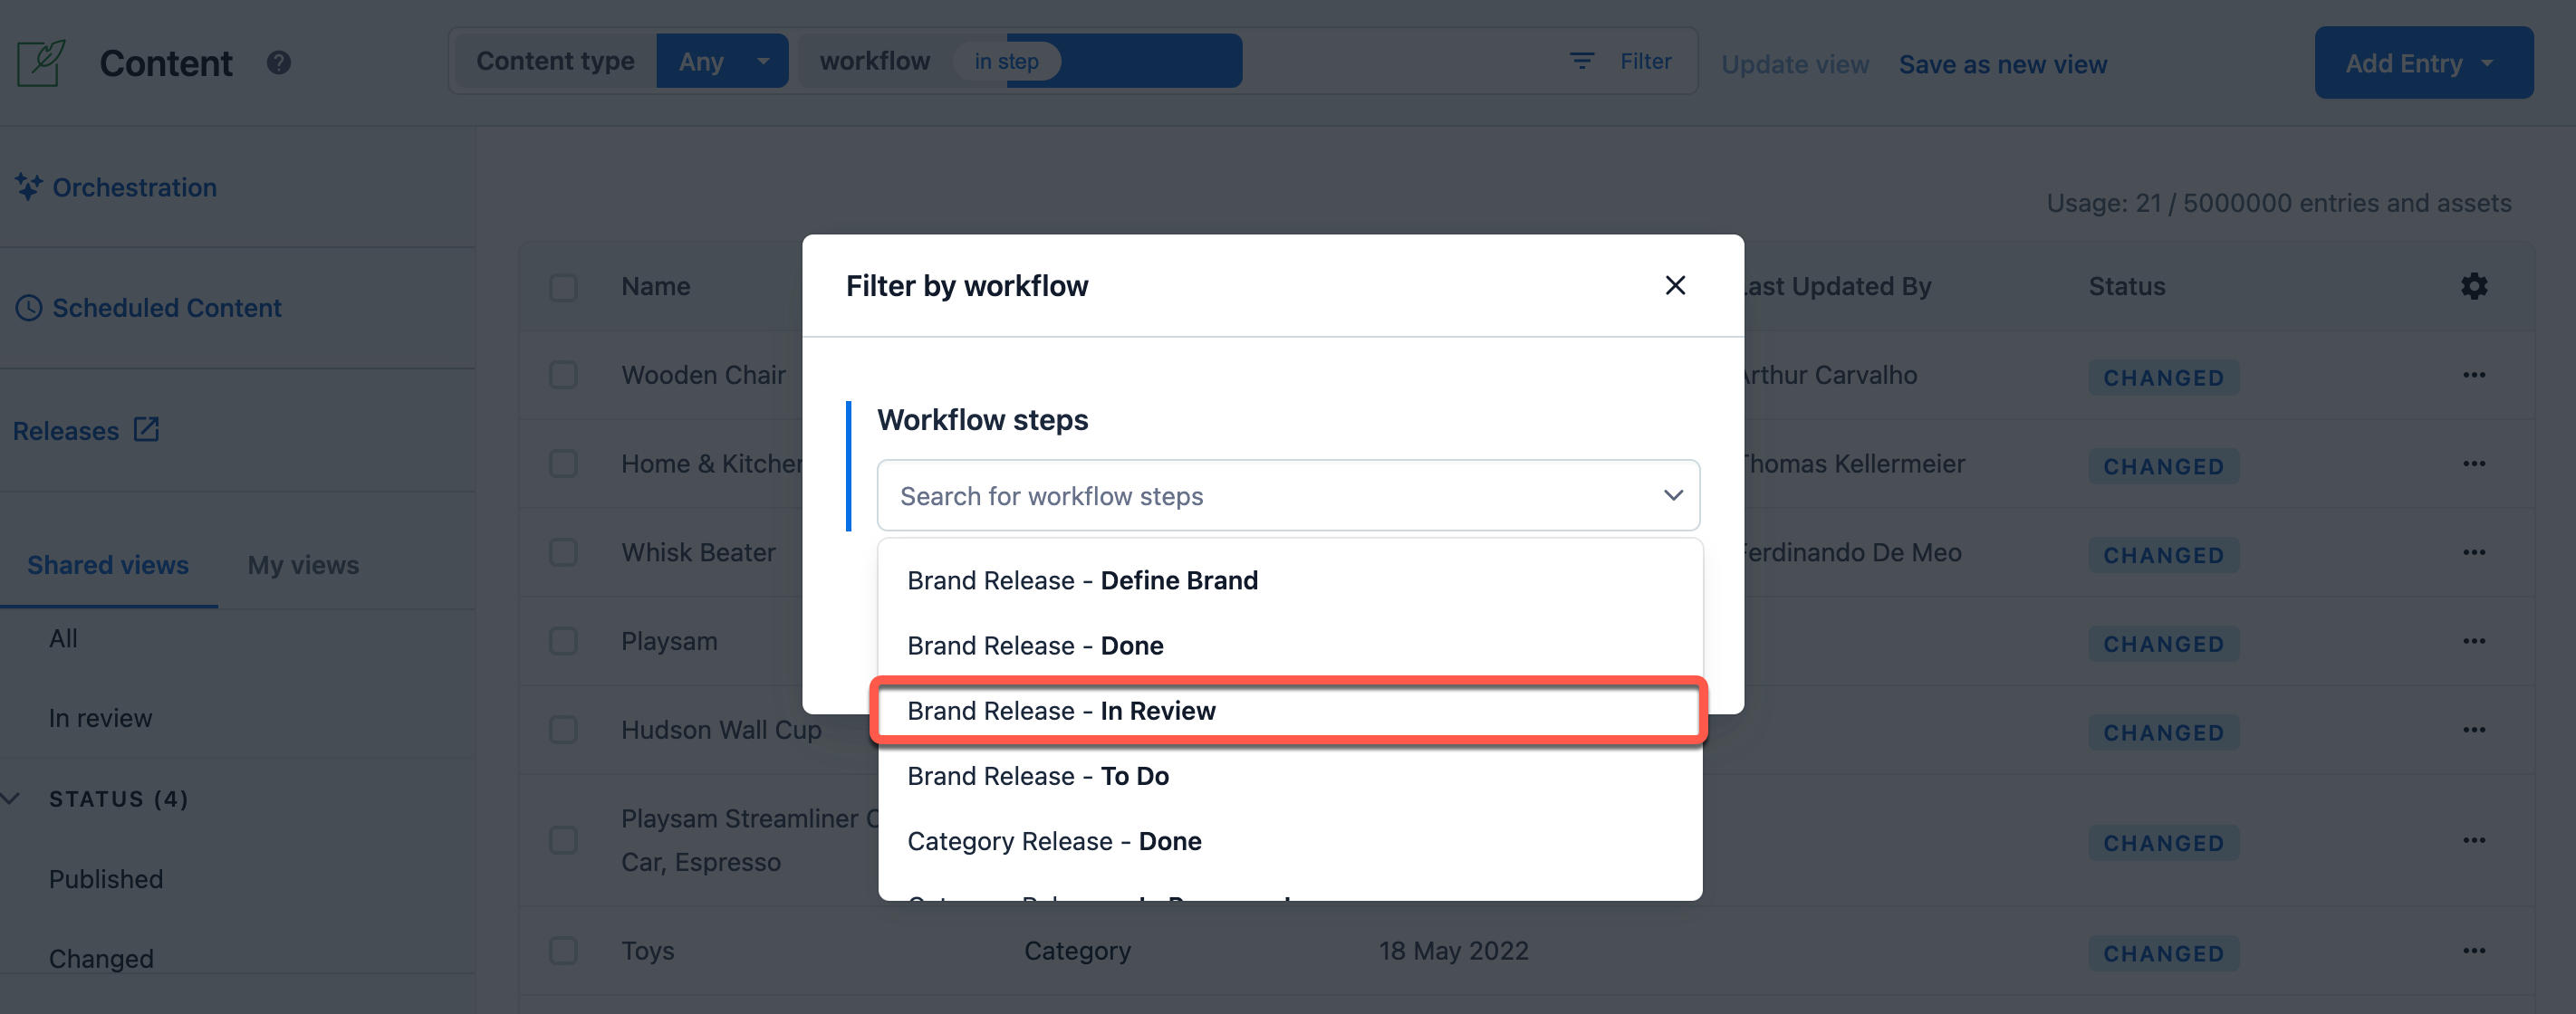 workflow status in review 